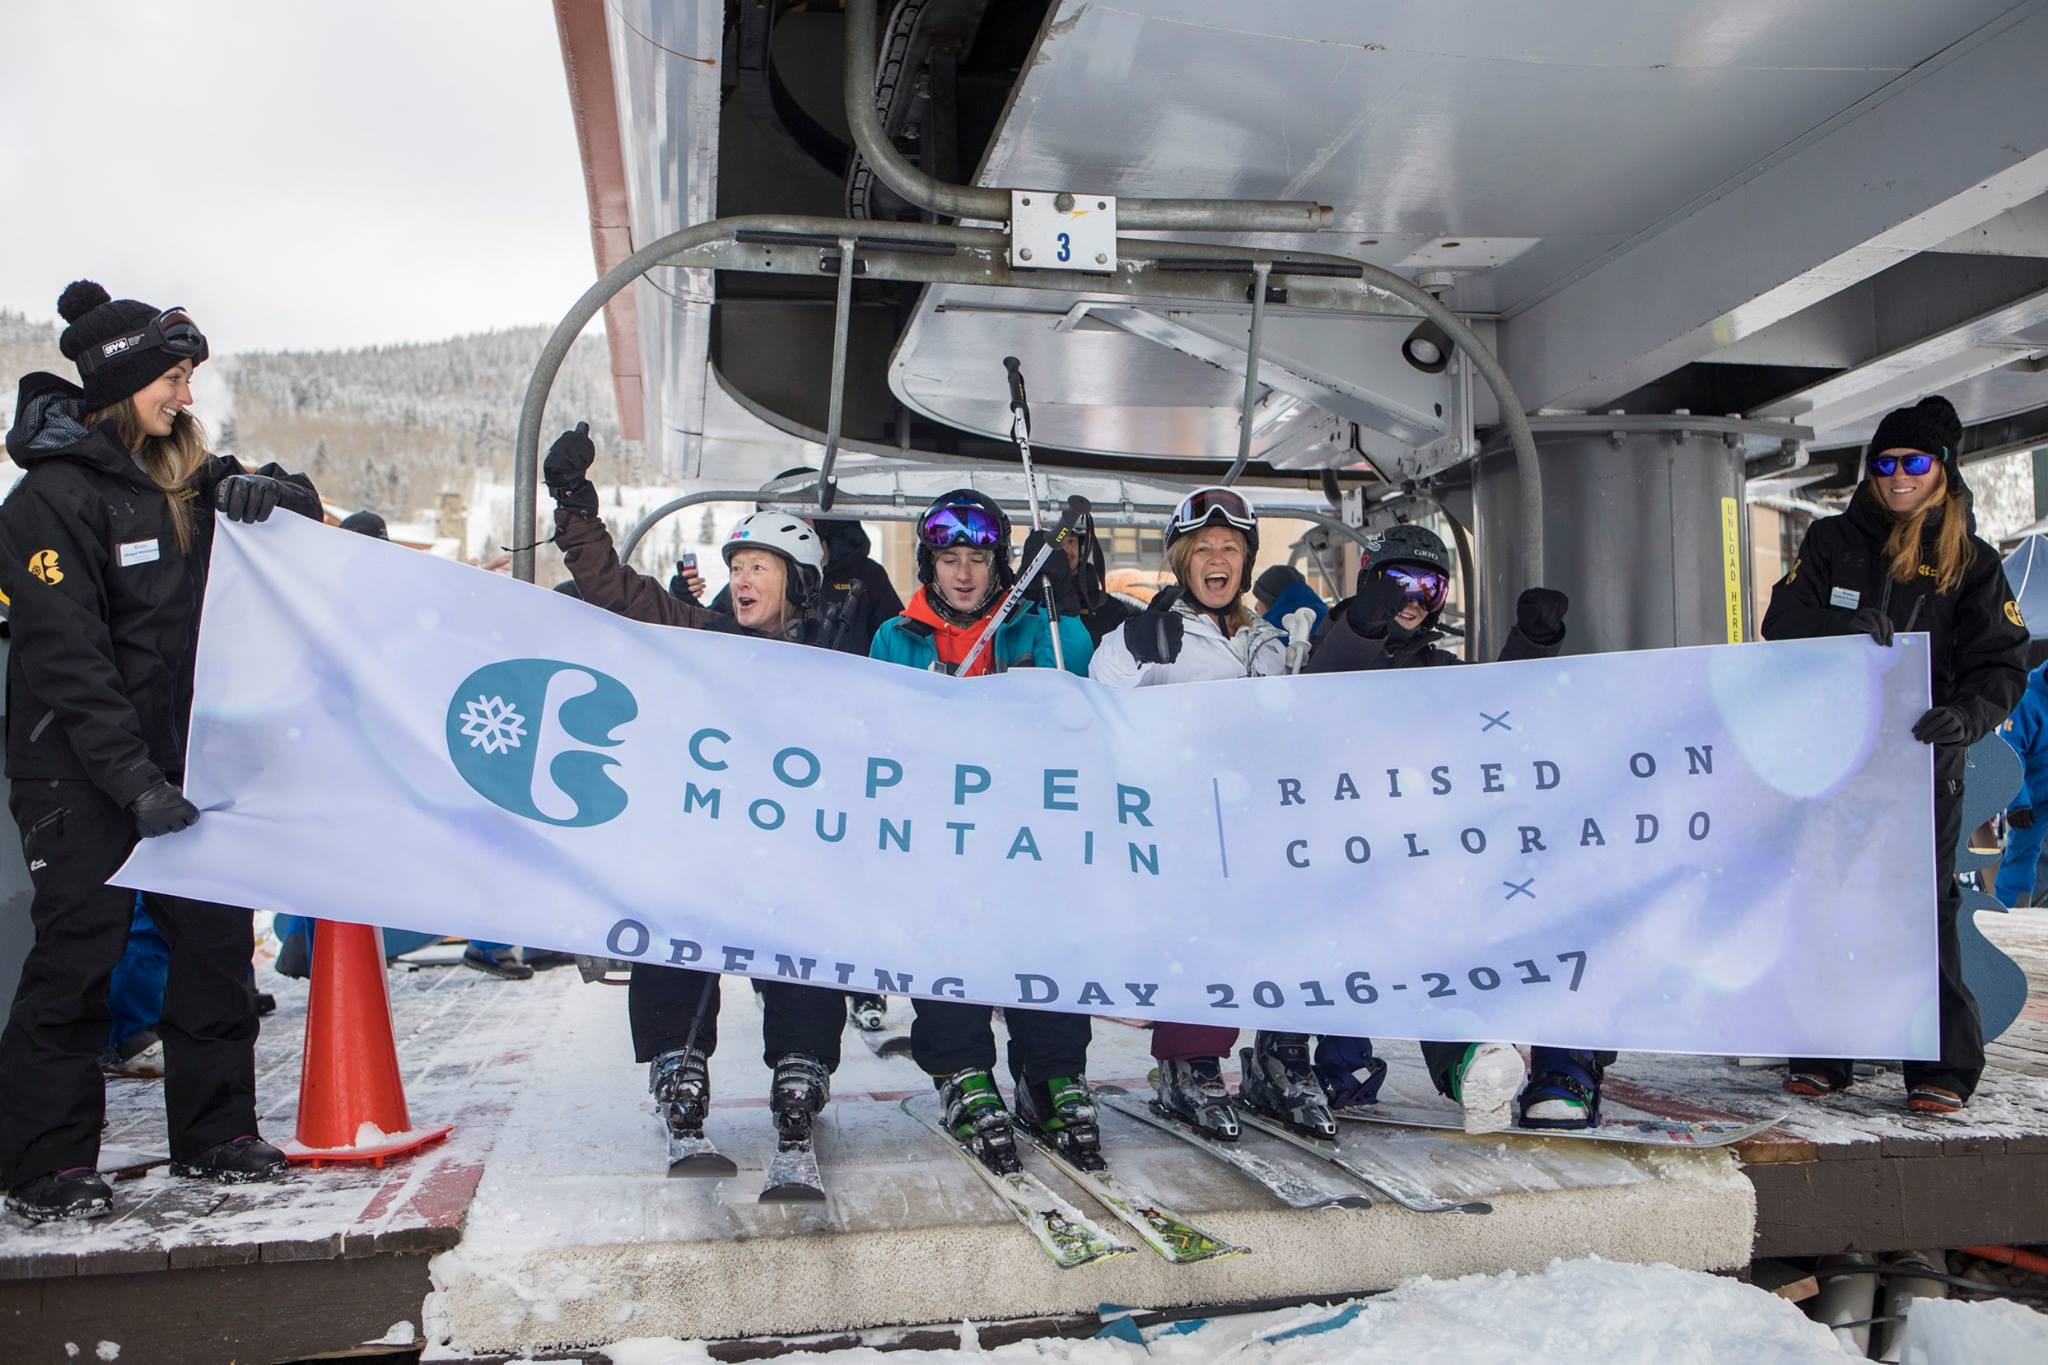 Copper Mountain is OPEN! PC: Copper Mountain Facebook Page